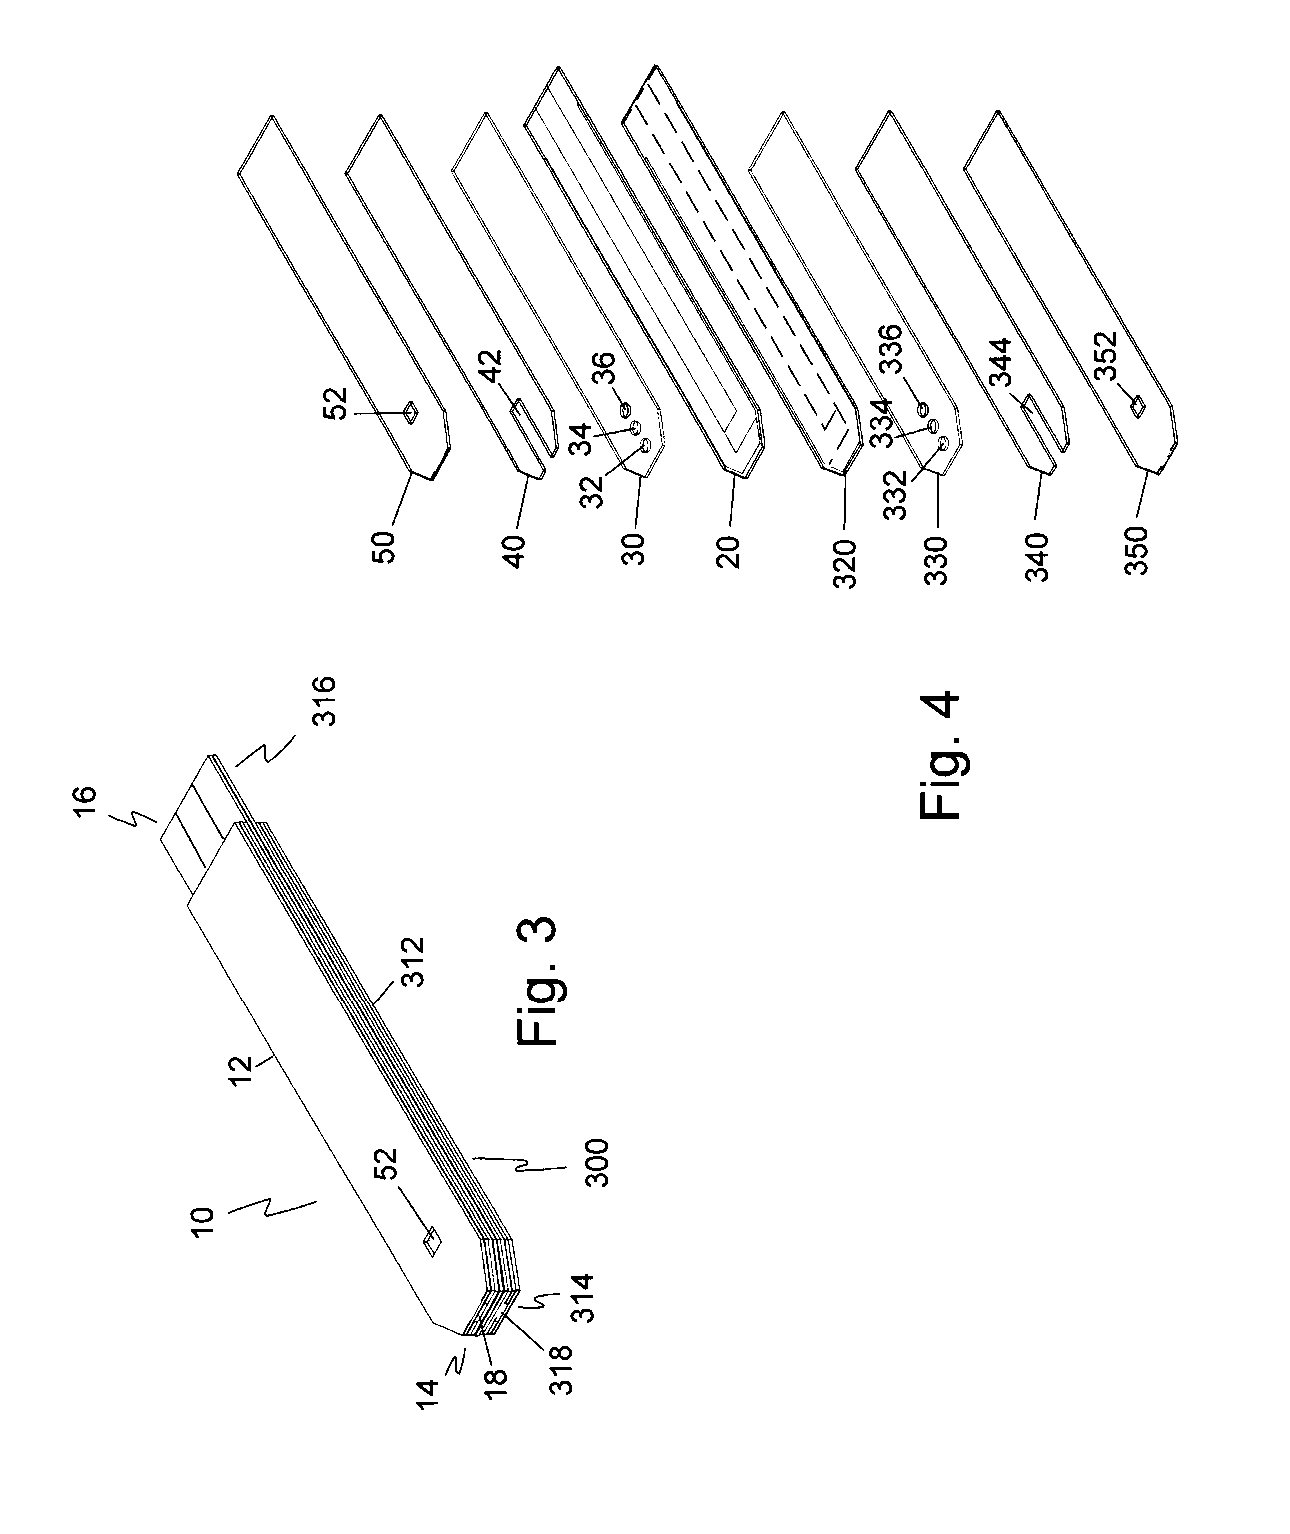 Disposable urea sensor and system for determining creatinine and urea nitrogen-to-creatinine ratio in a single device